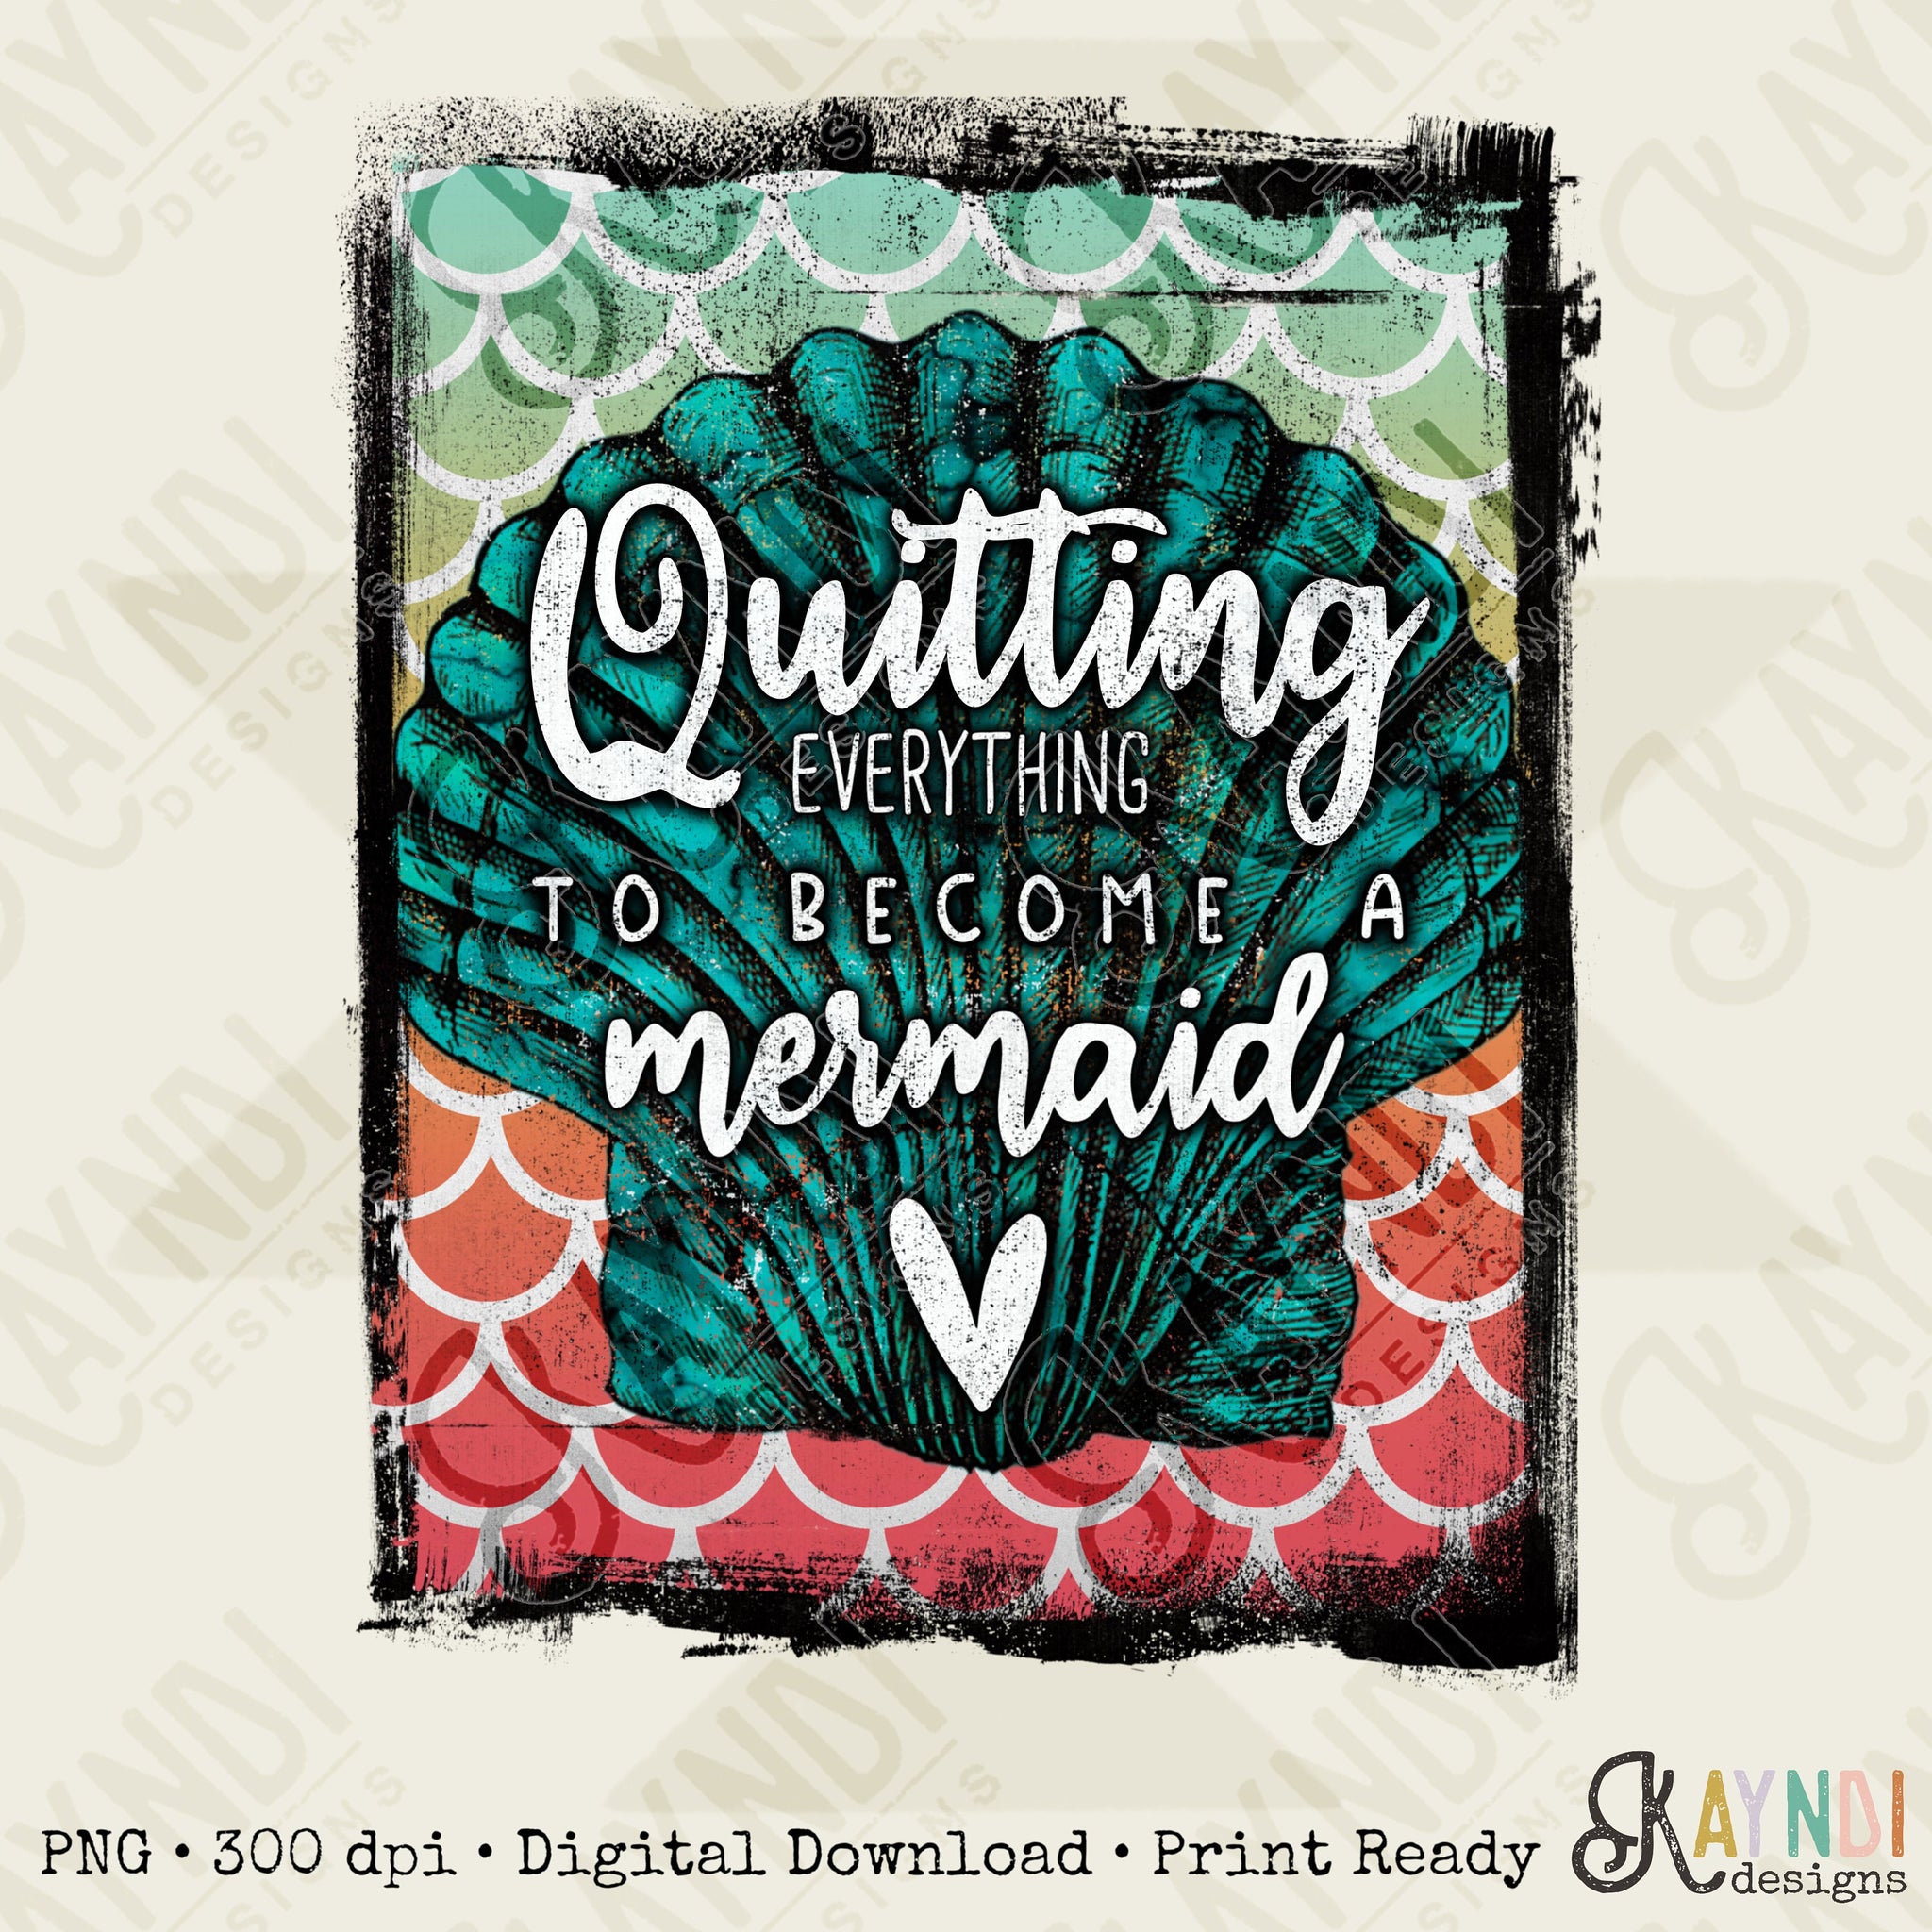 Quitting Everything to become a Mermaid Sublimation Design PNG Digital Download Printable Seashell Sea Shell Beach Summer Vacation Grunge